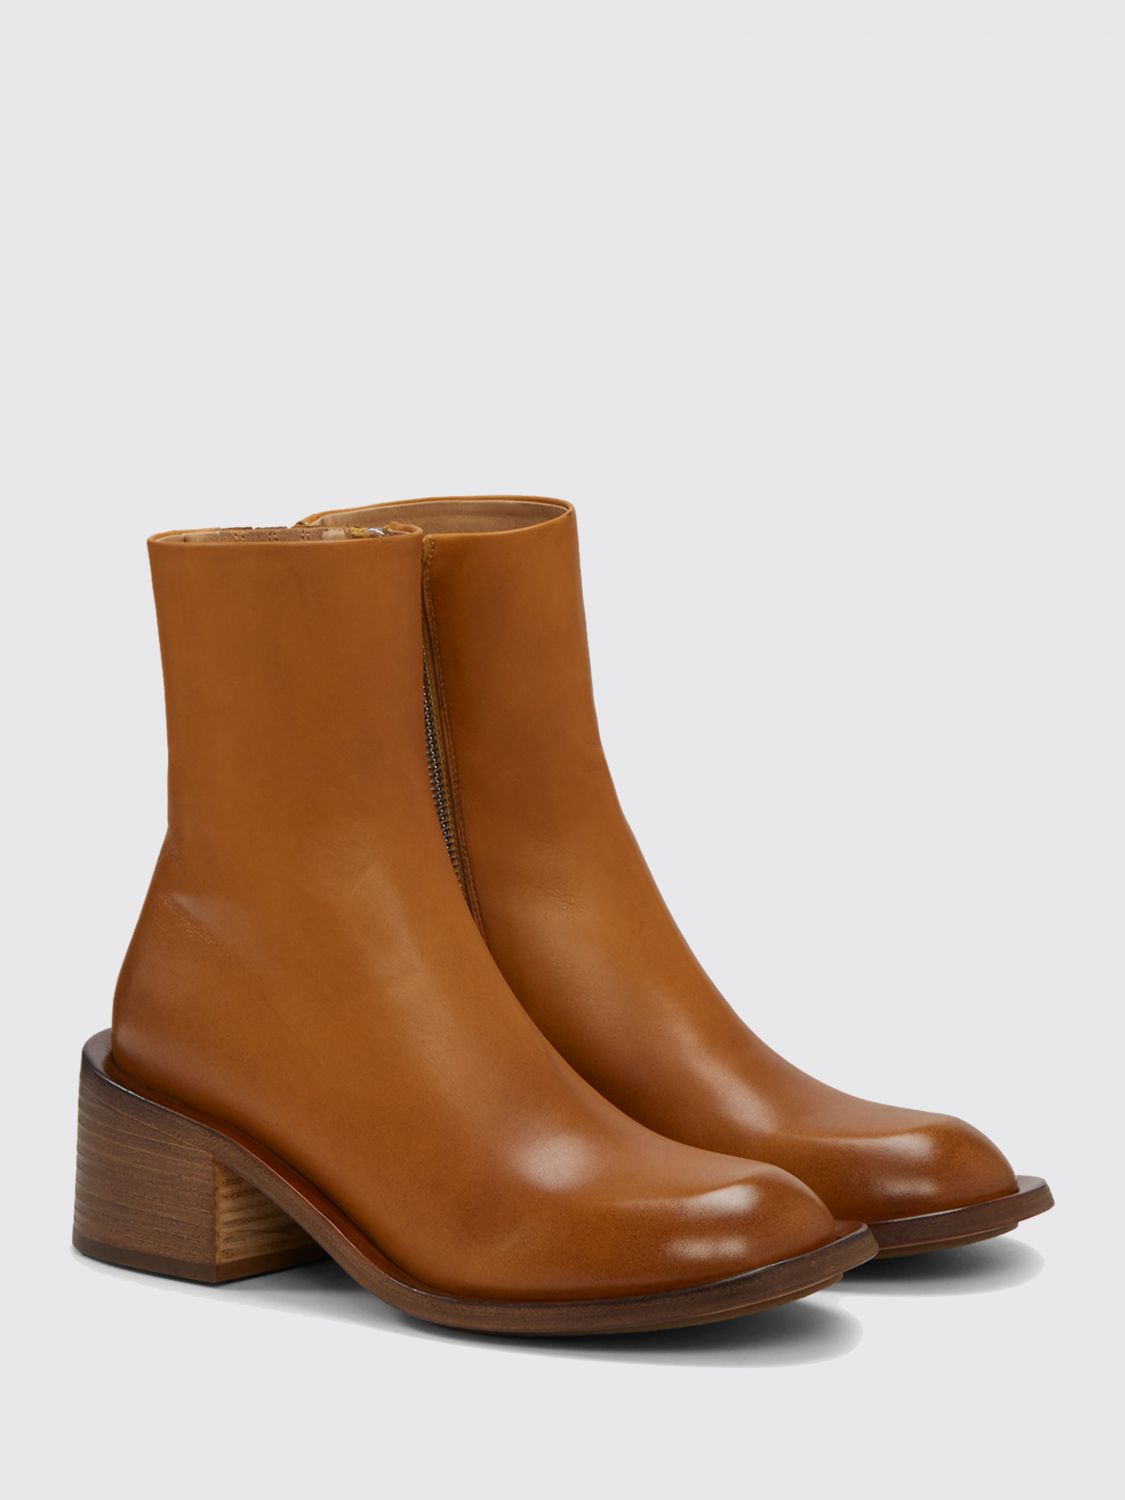 Marsèll Marsell Allucino Ankle Boots In Nappa With Zip In Mustard